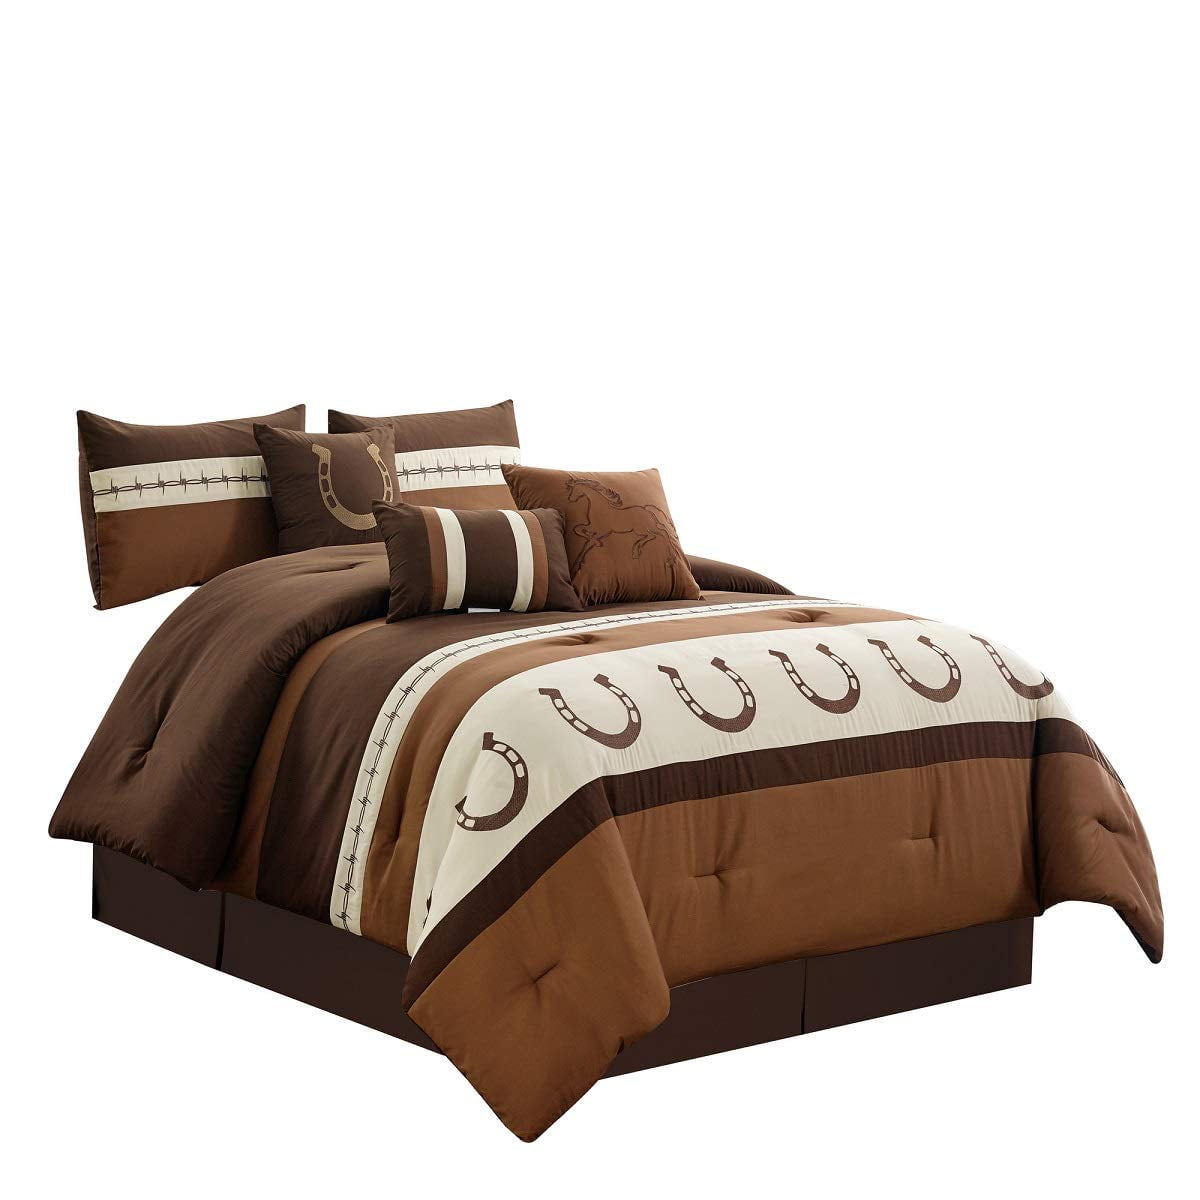 Details about   17 piece Queen size Chocolate Cream Rodeo Cow Comforter Sheets and 2 curtain set 